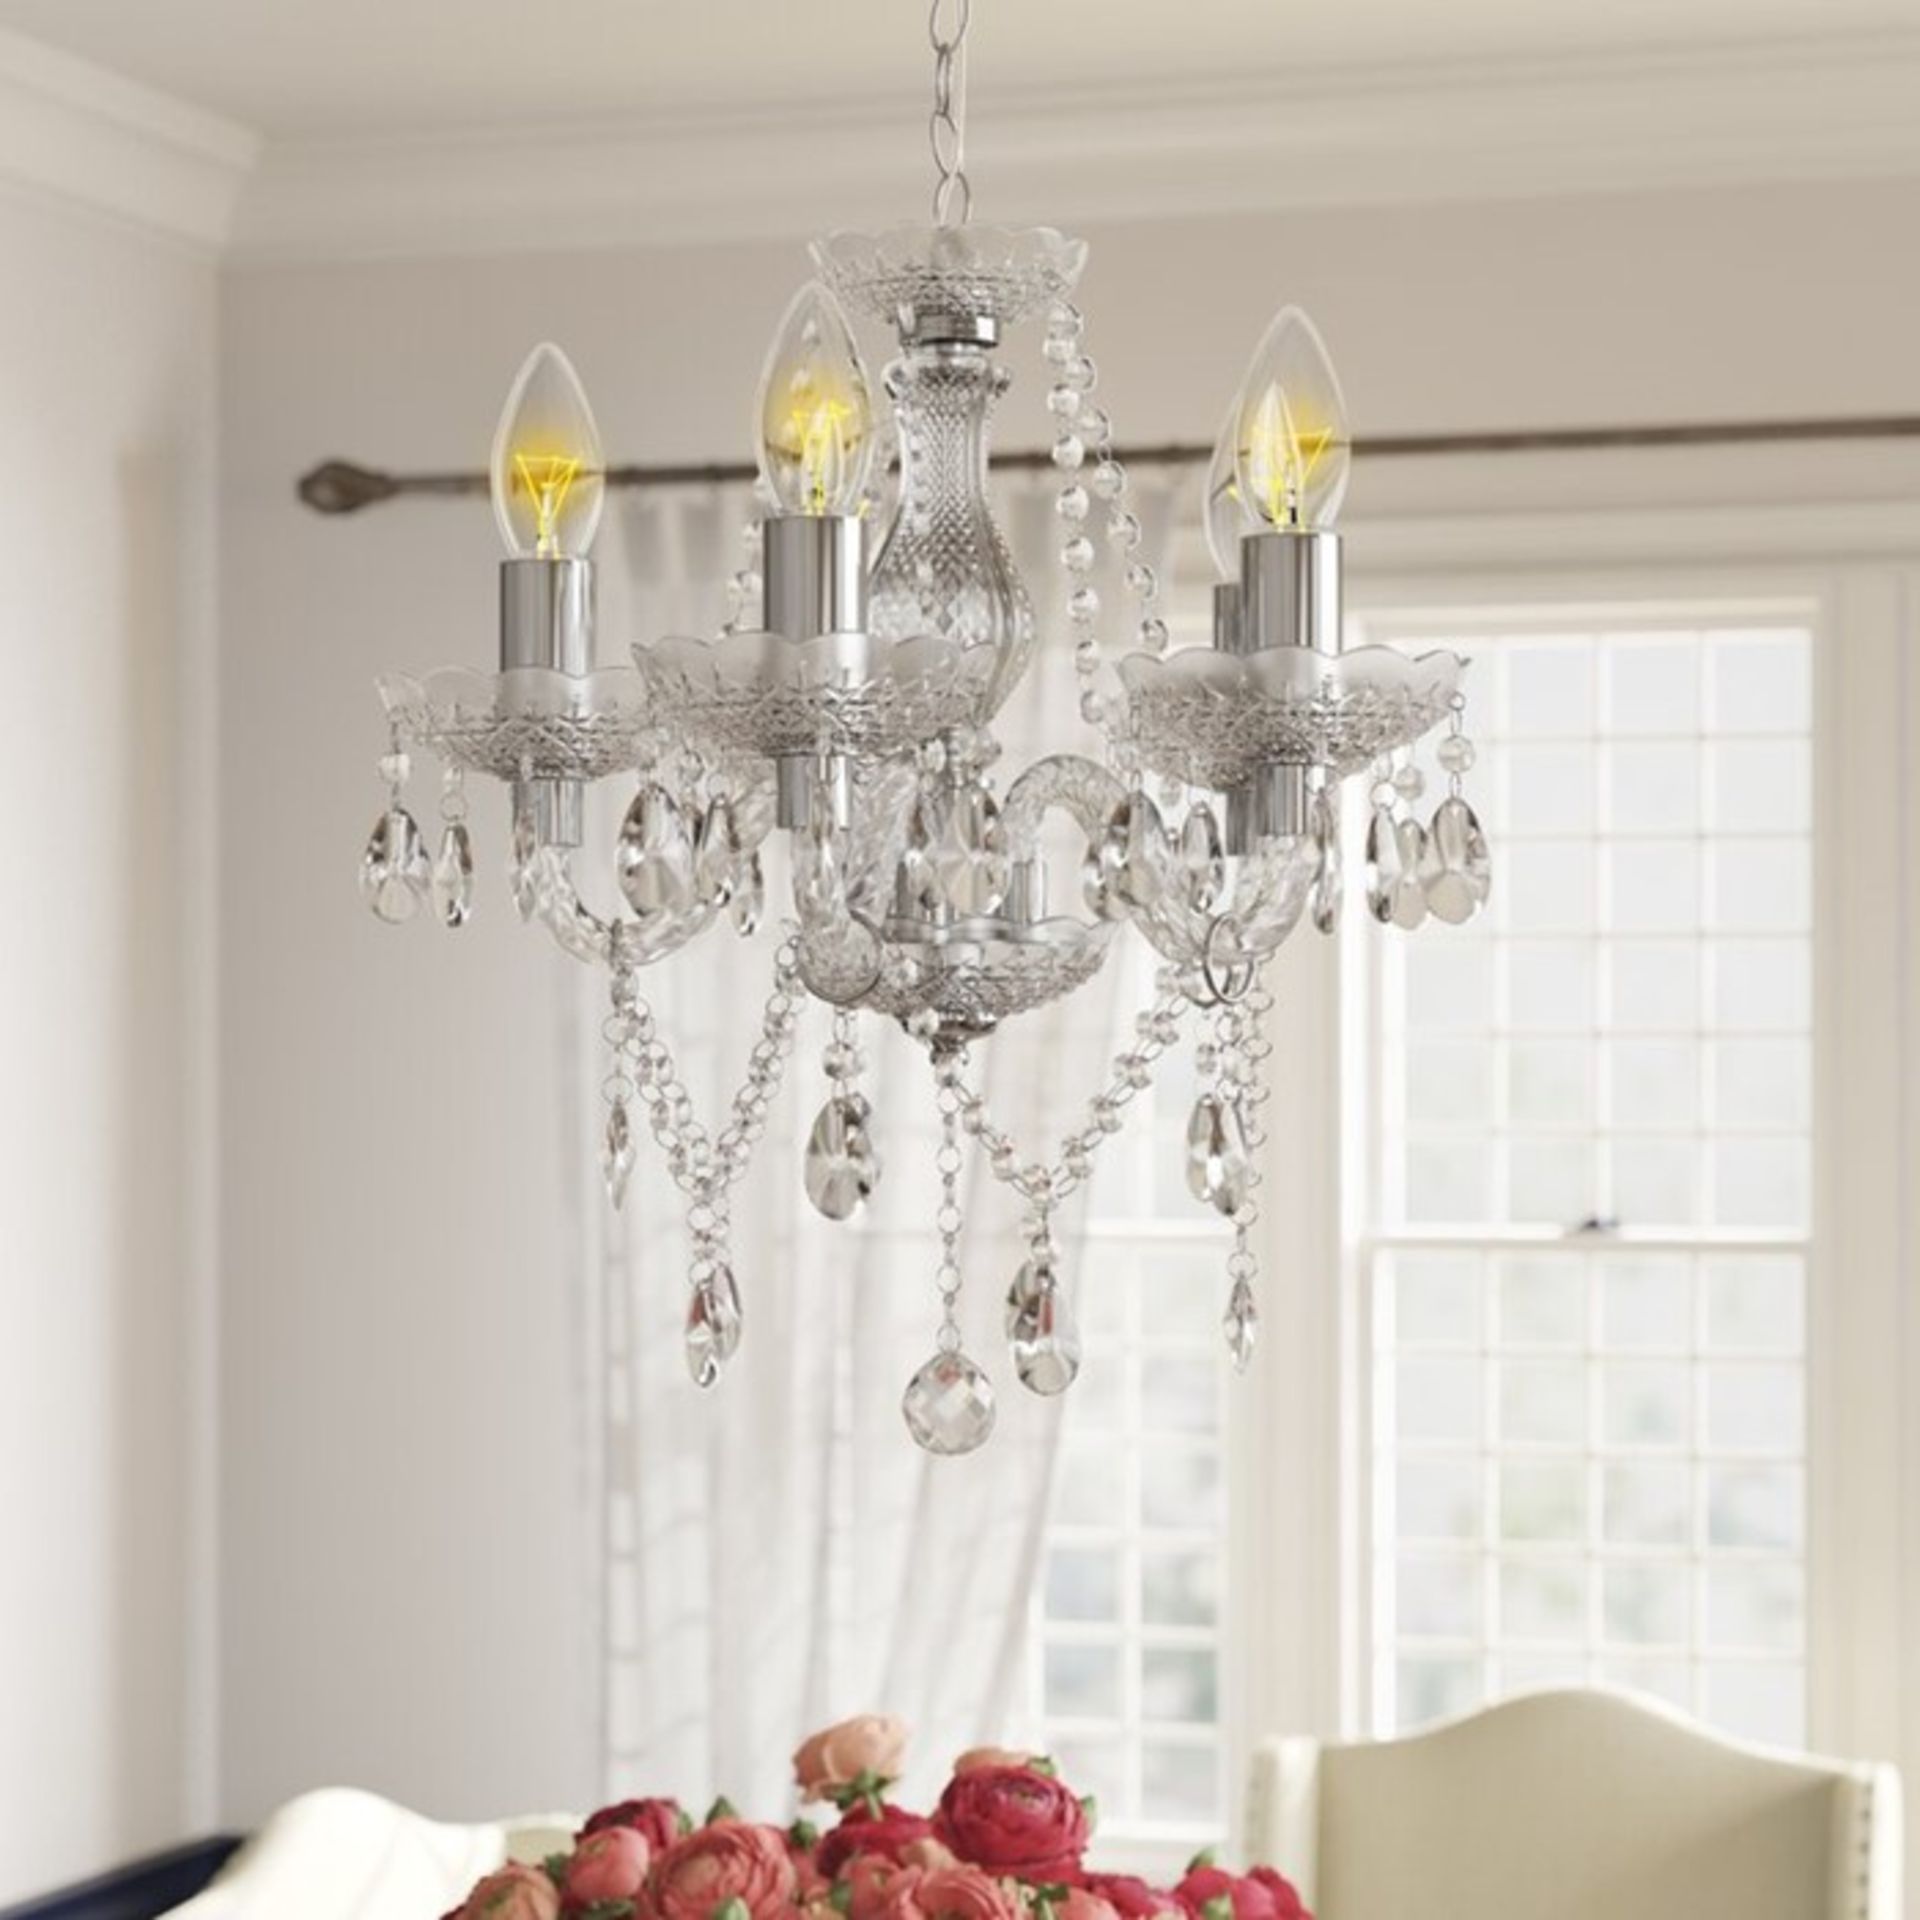 First Choice Lighting, Marie Therese 5-Light Candle-Style Chandelier (CLEAR AND CHROME) - RRP £55.99